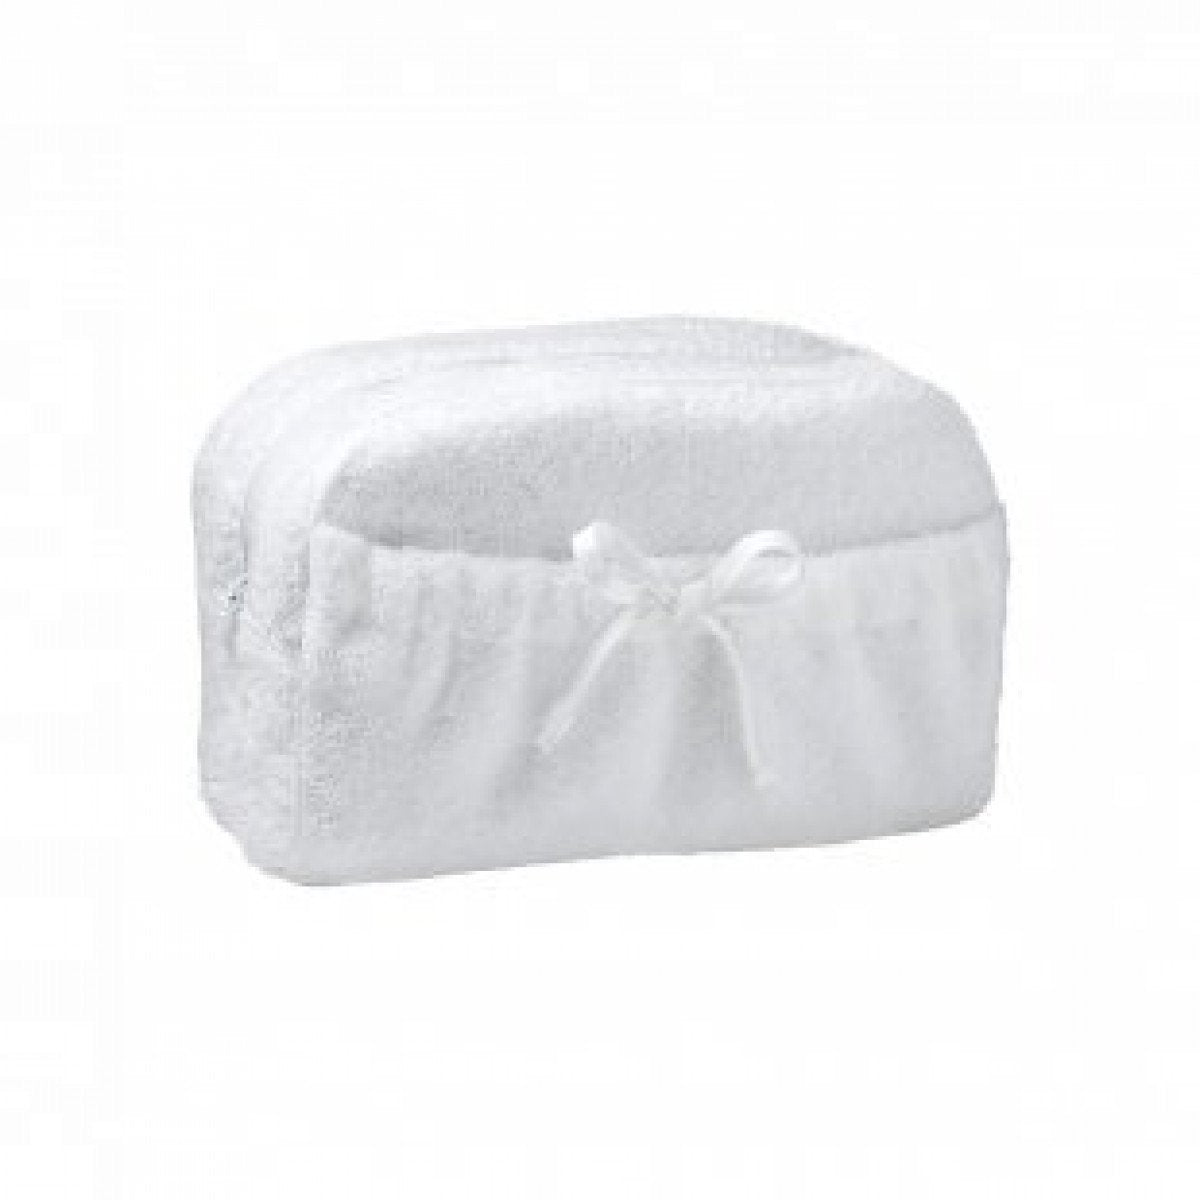 Etoile Blanc Cosmetic Bag by Yves Delorme | Fig Linens - White powder bag, tote